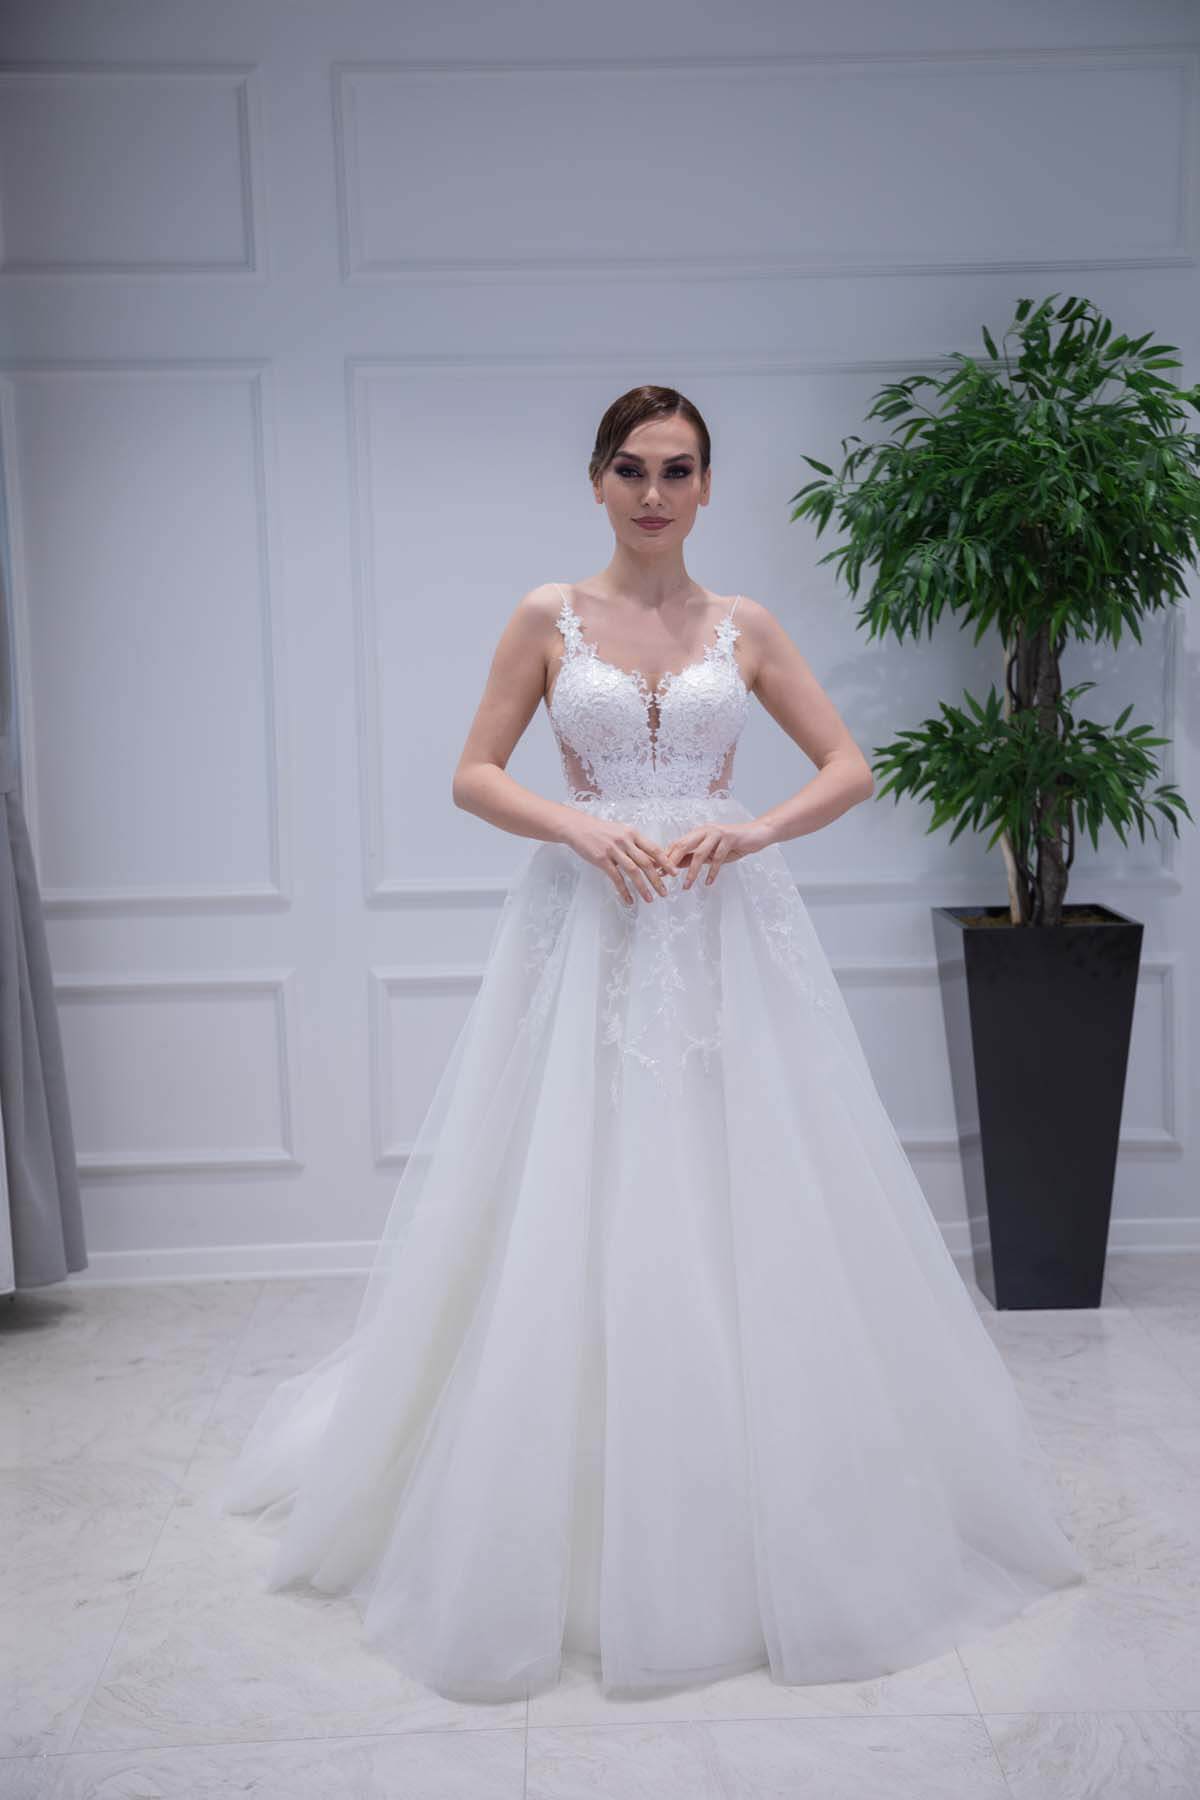 Helen Wedding Dress with Shoulder Straps and Low-Cut Decollete